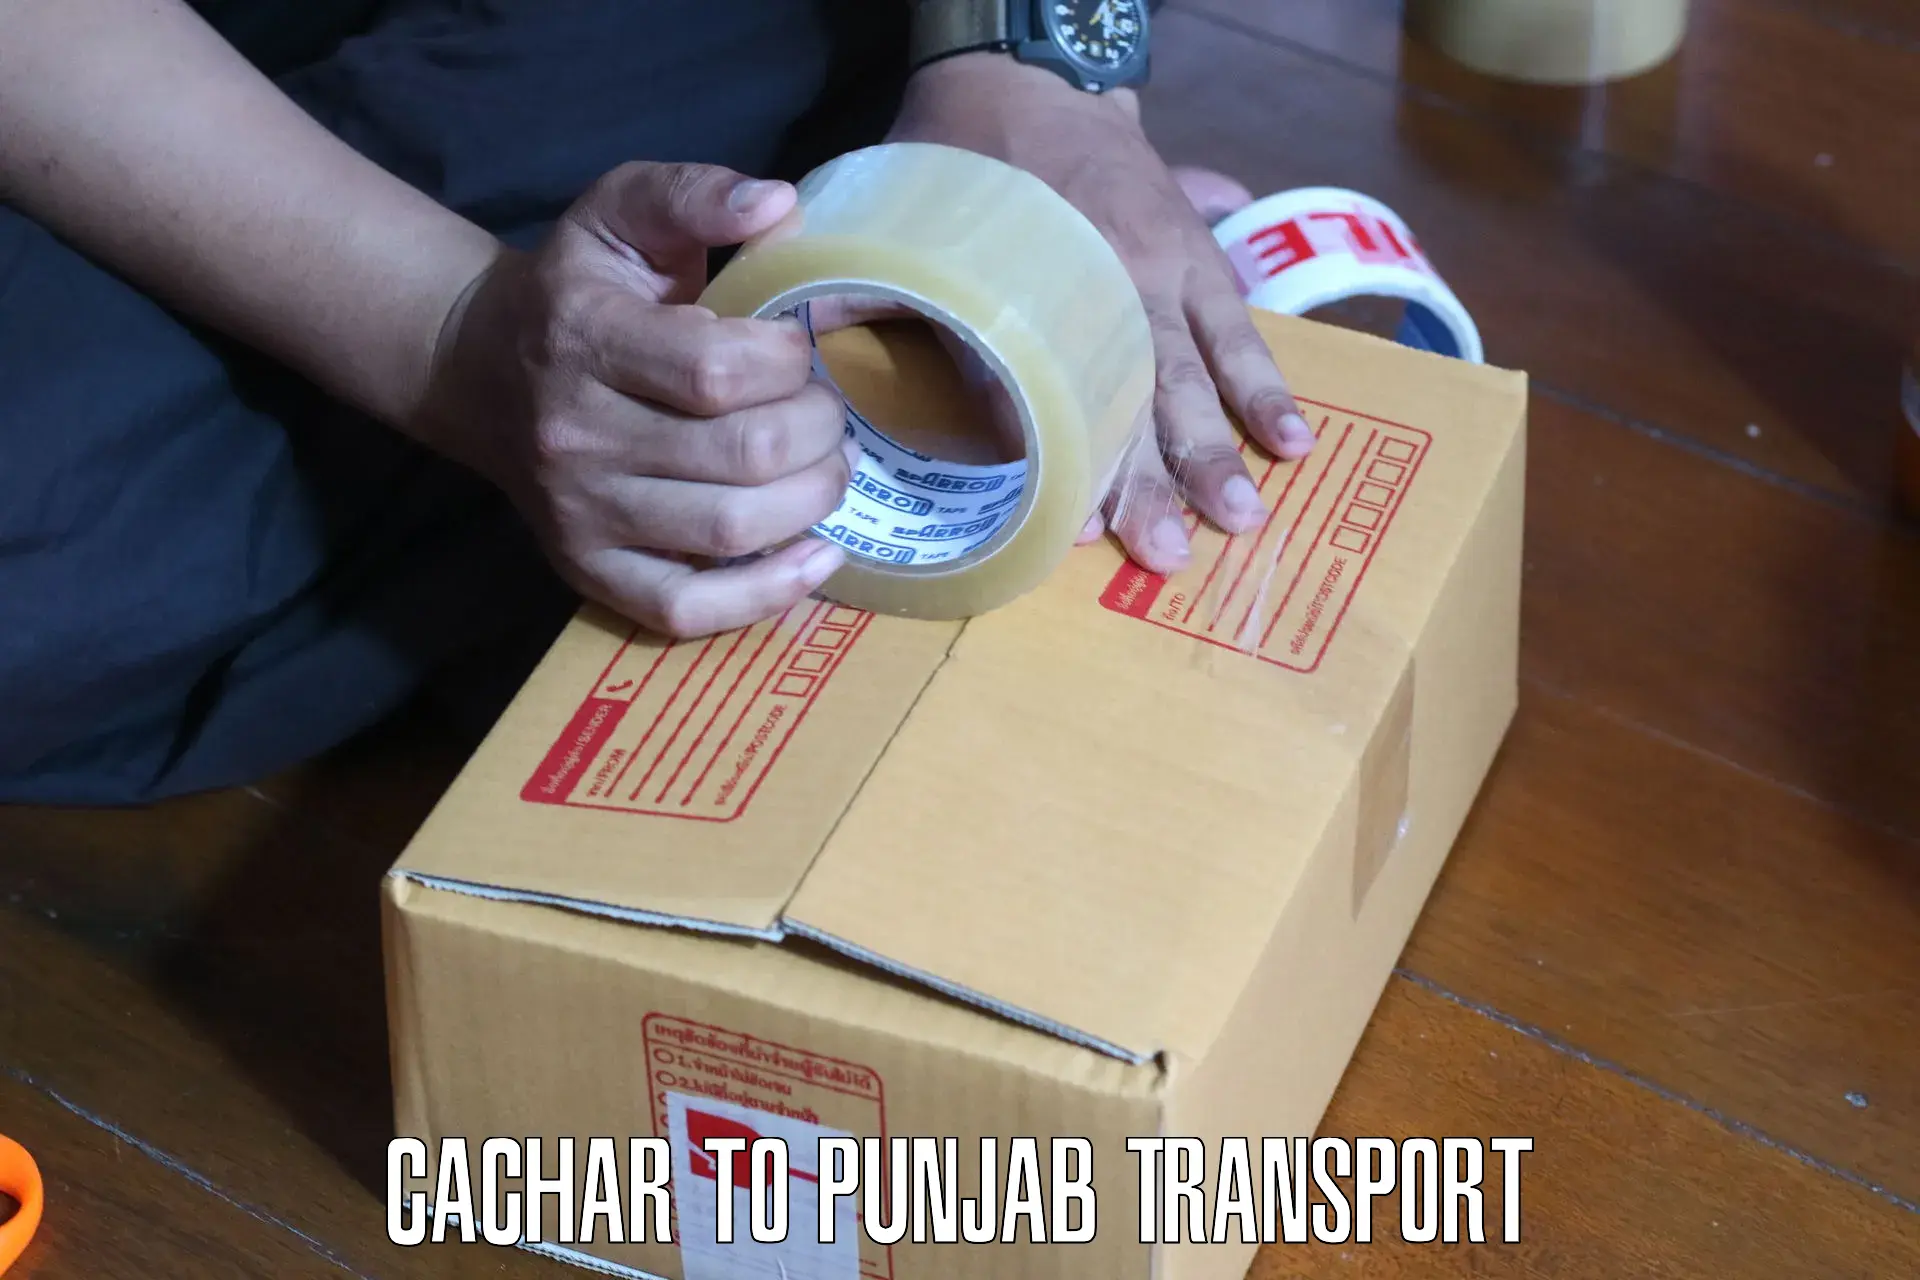 Shipping partner in Cachar to Punjab